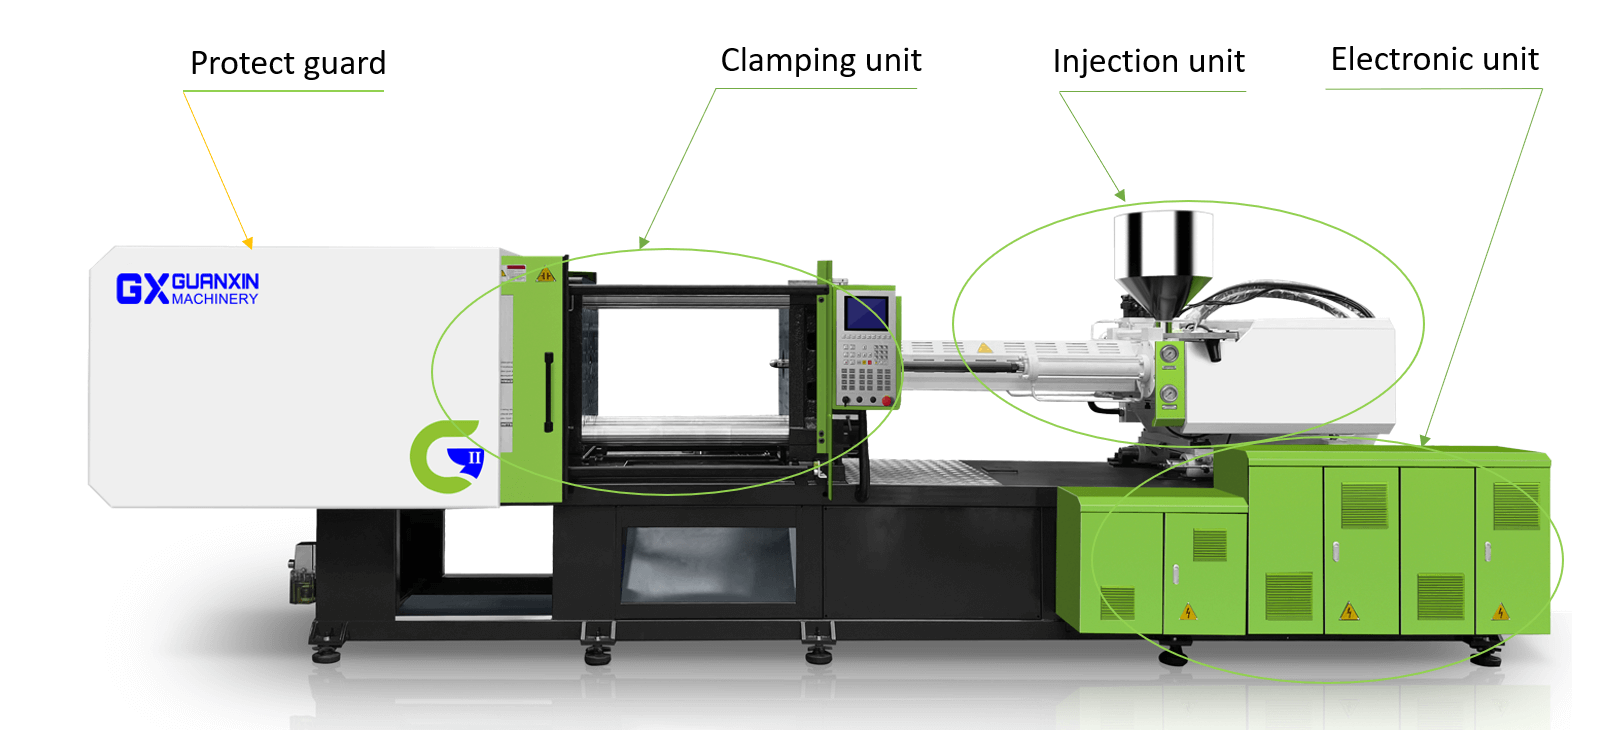 Main parts and components of an injection molding machine